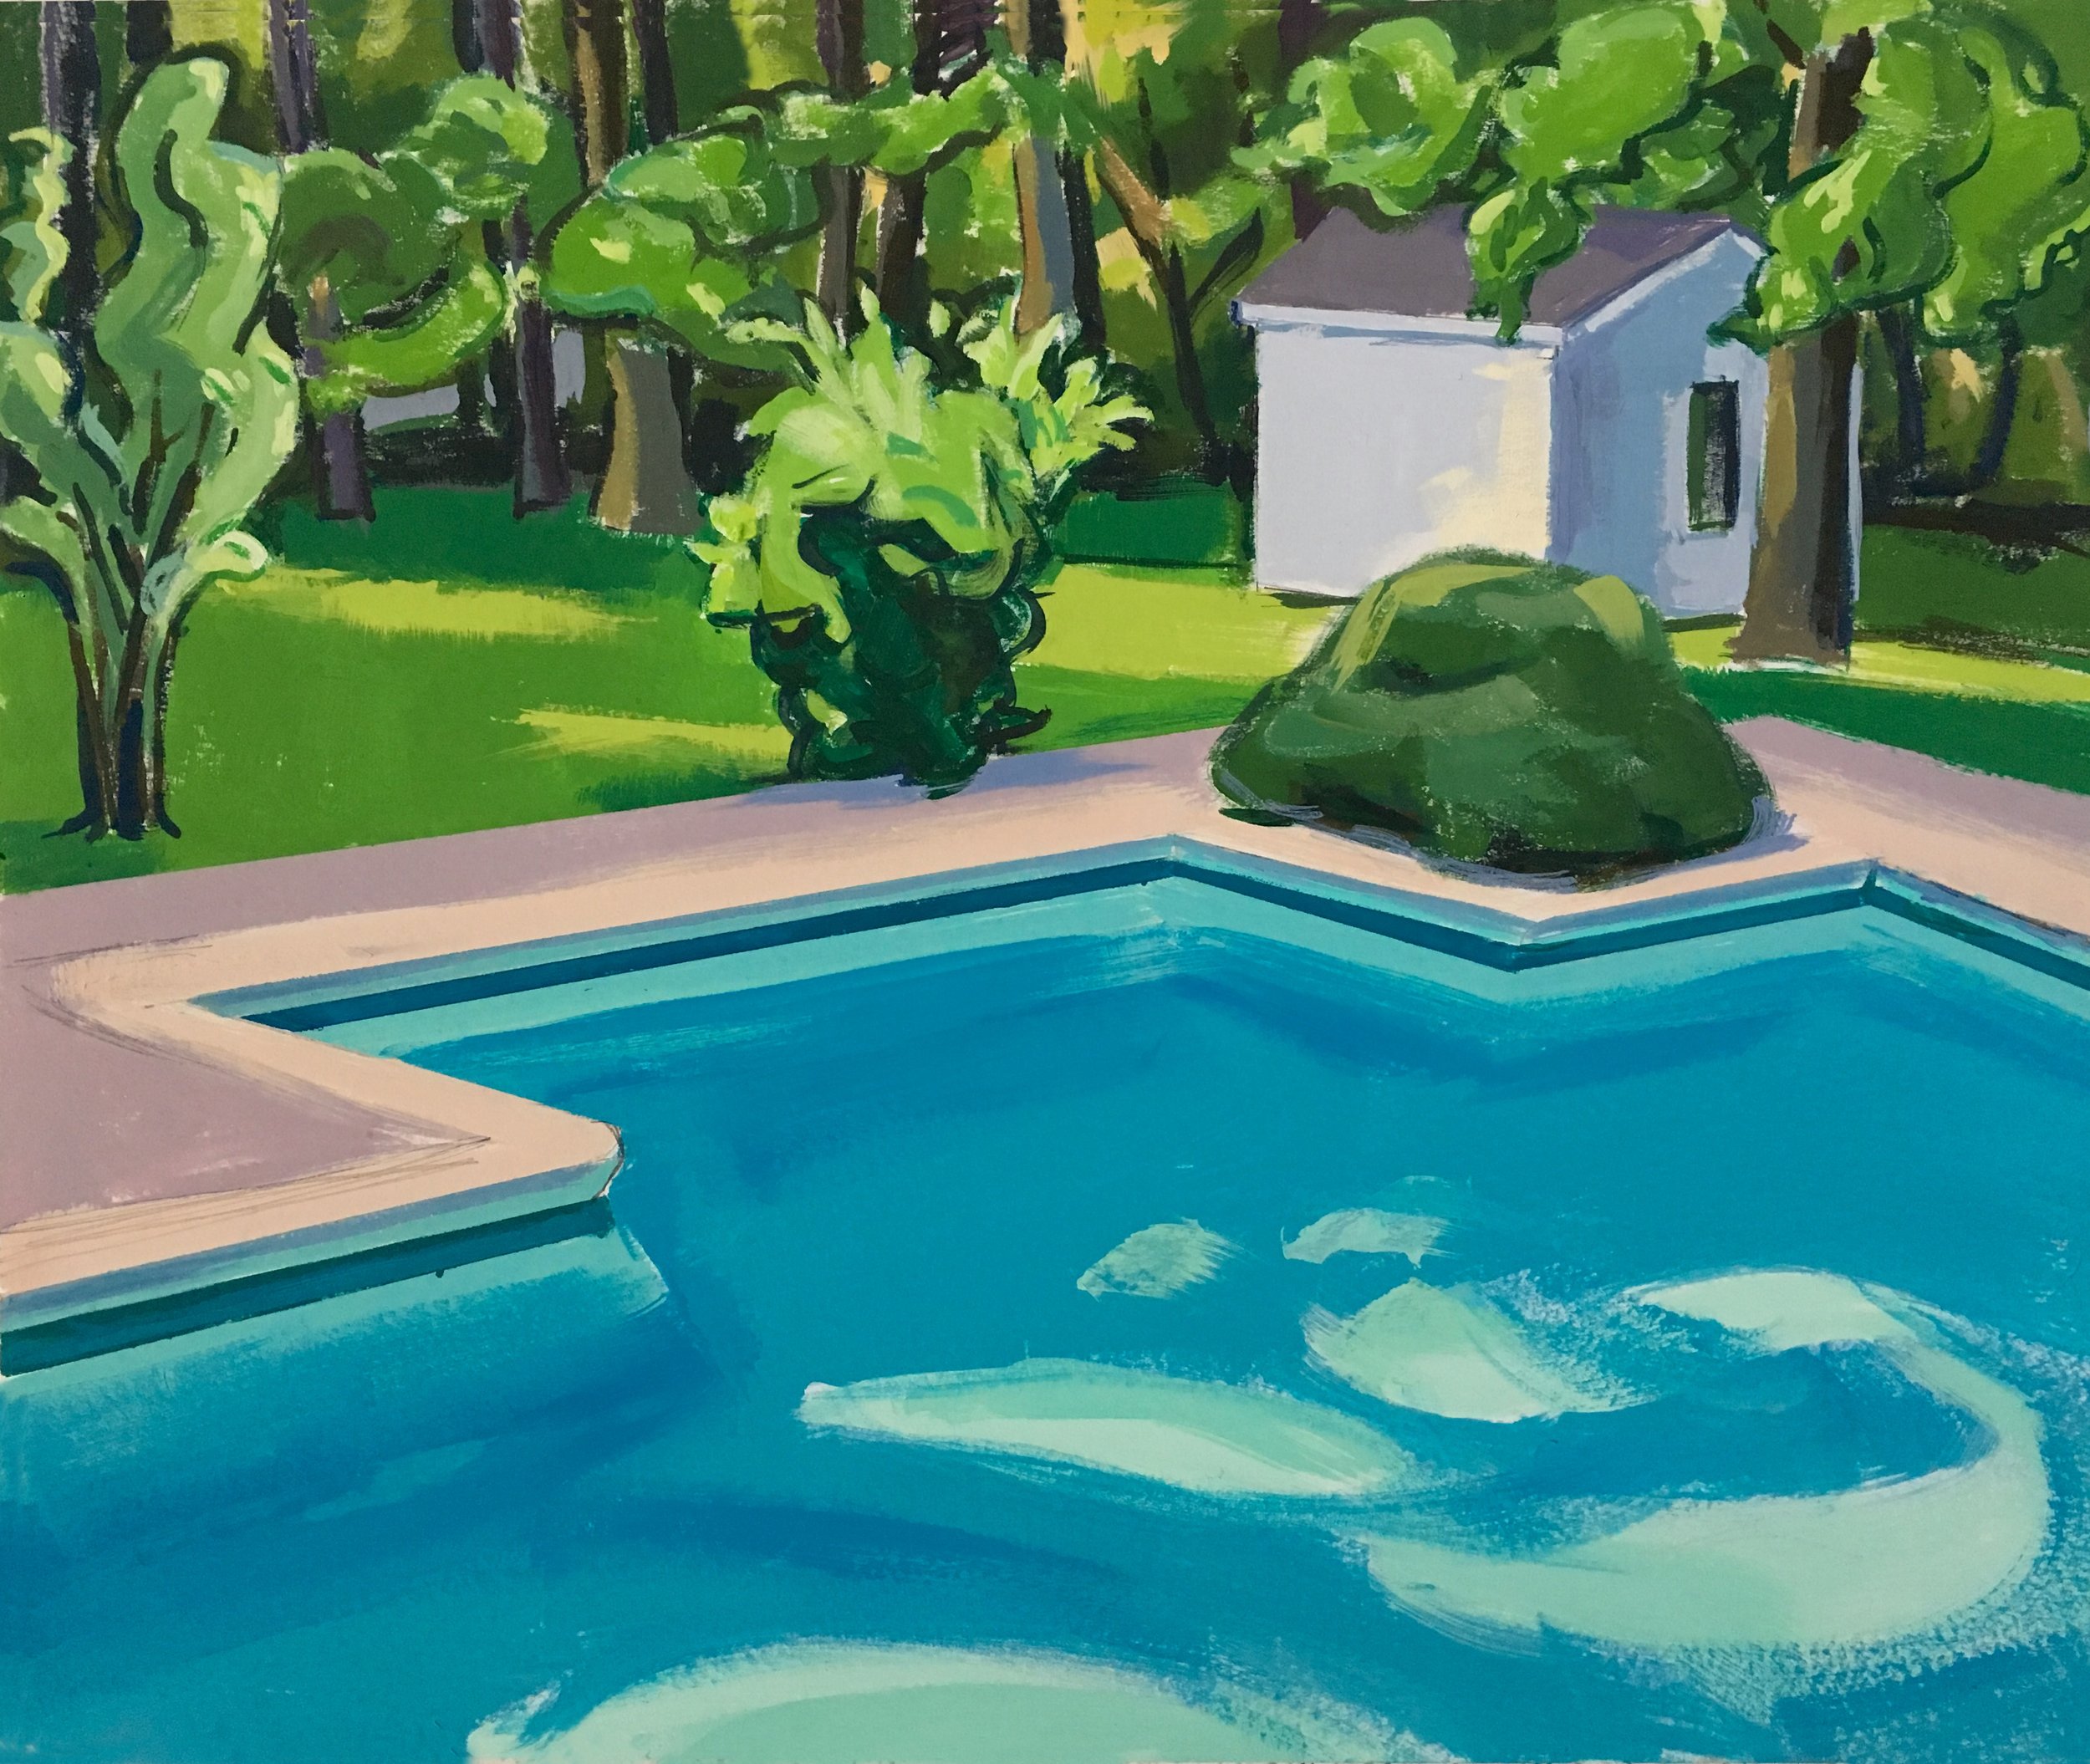    Pool with Shed,   gouache, 14 x 17 in, 2019   